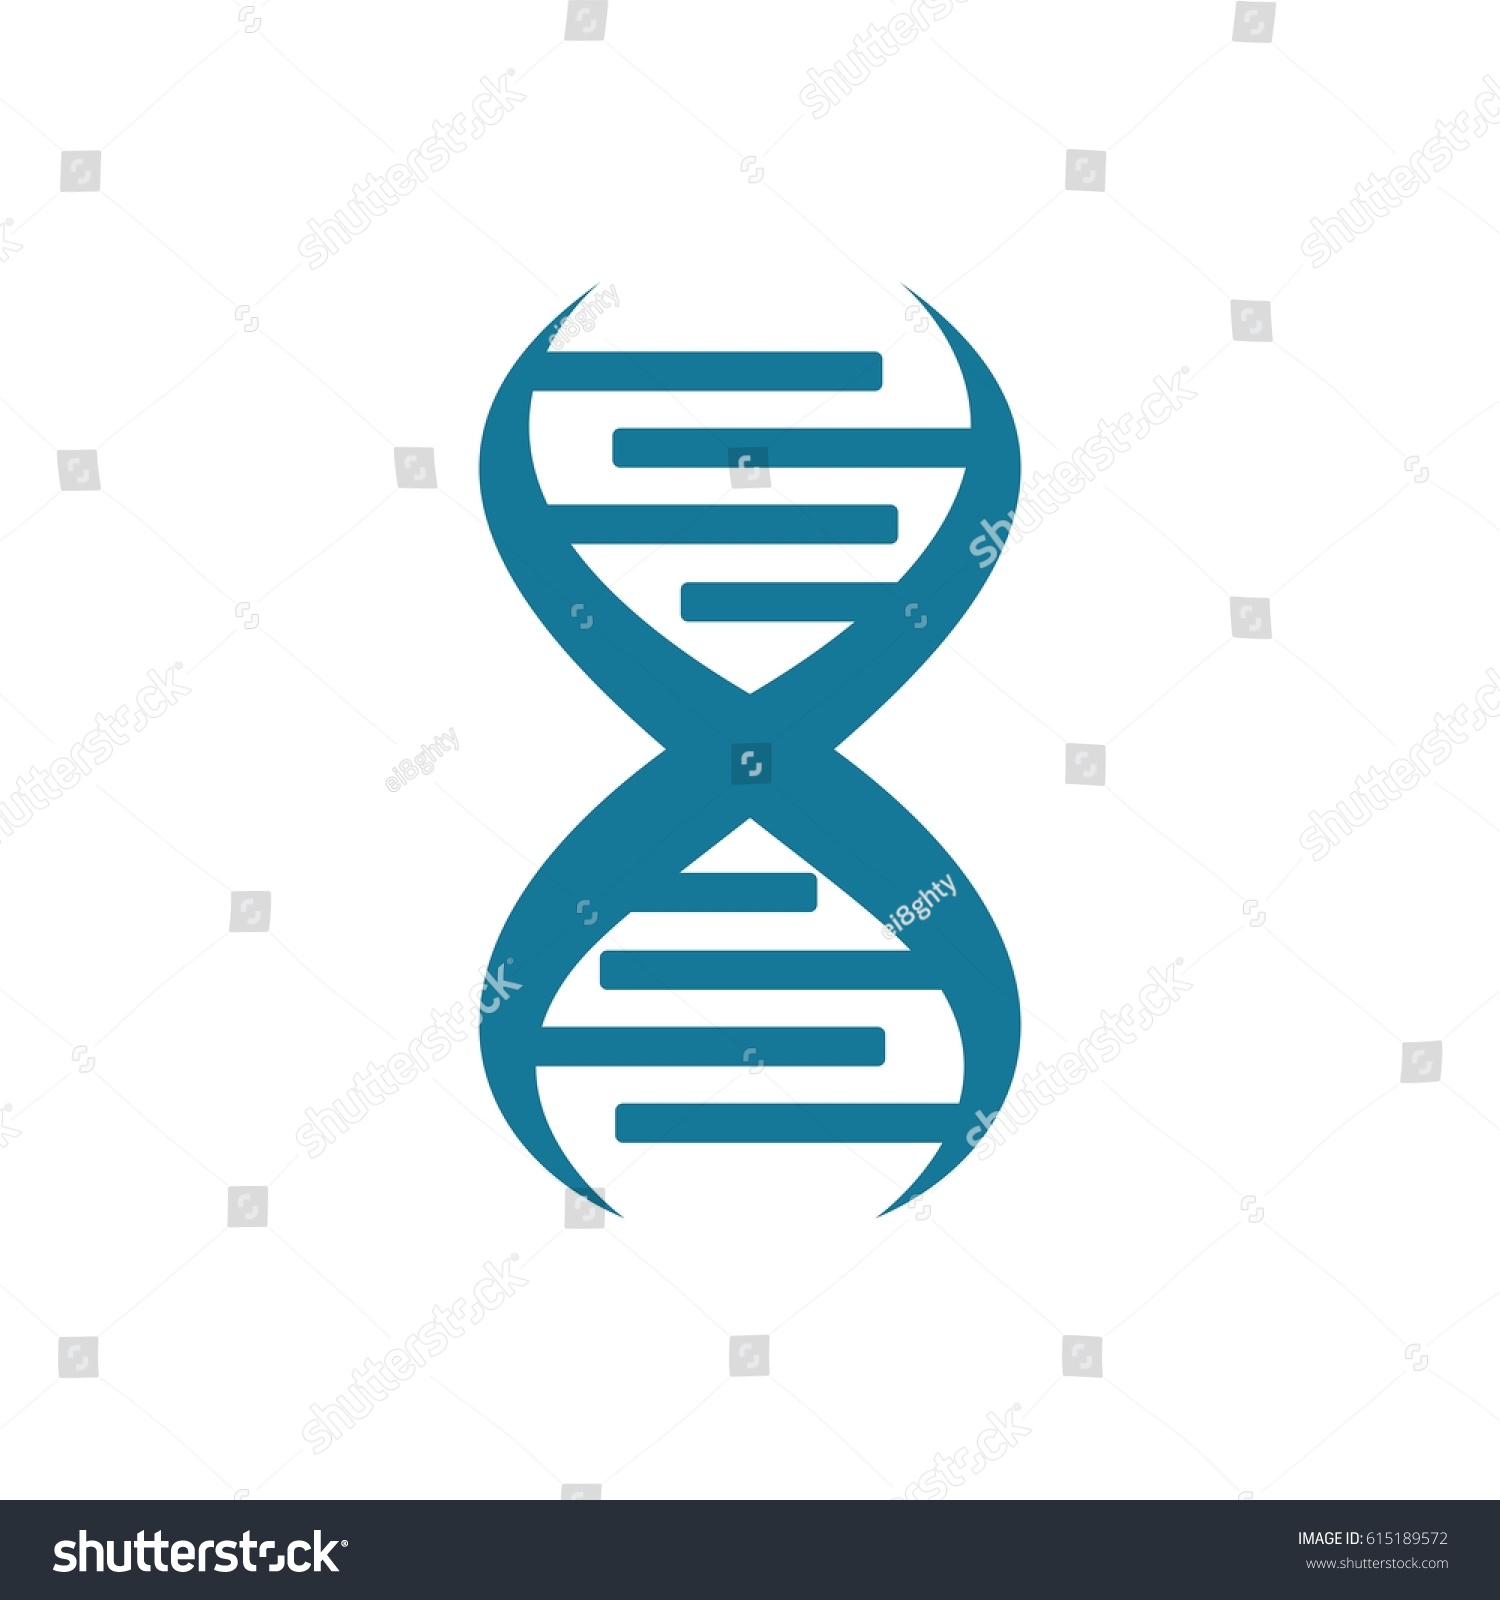 Double Helix Dna Logo Vector Royalty Free Stock Image